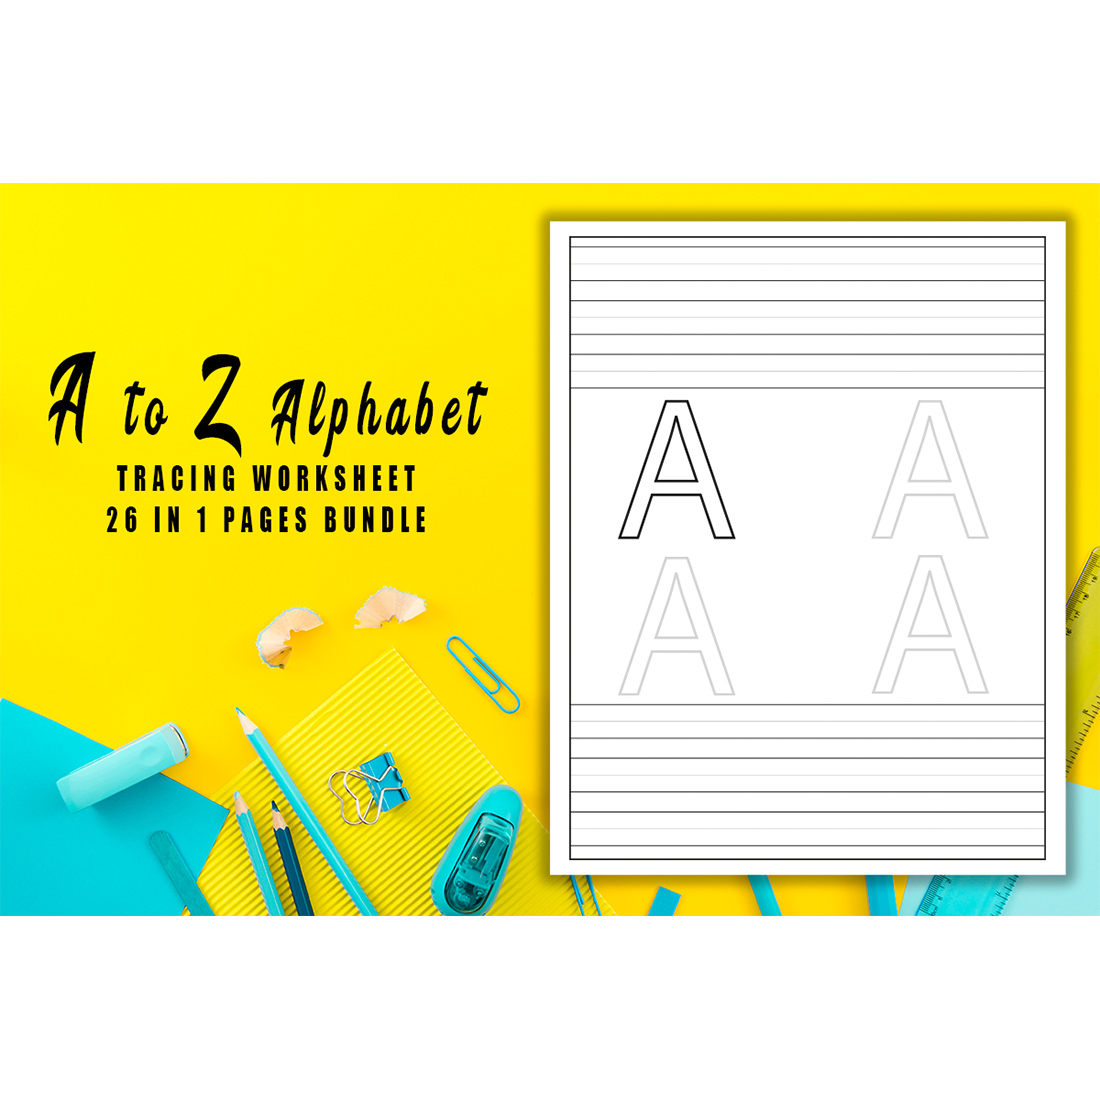 A to Z Alphabets Tracing Worksheets Bundle cover image.